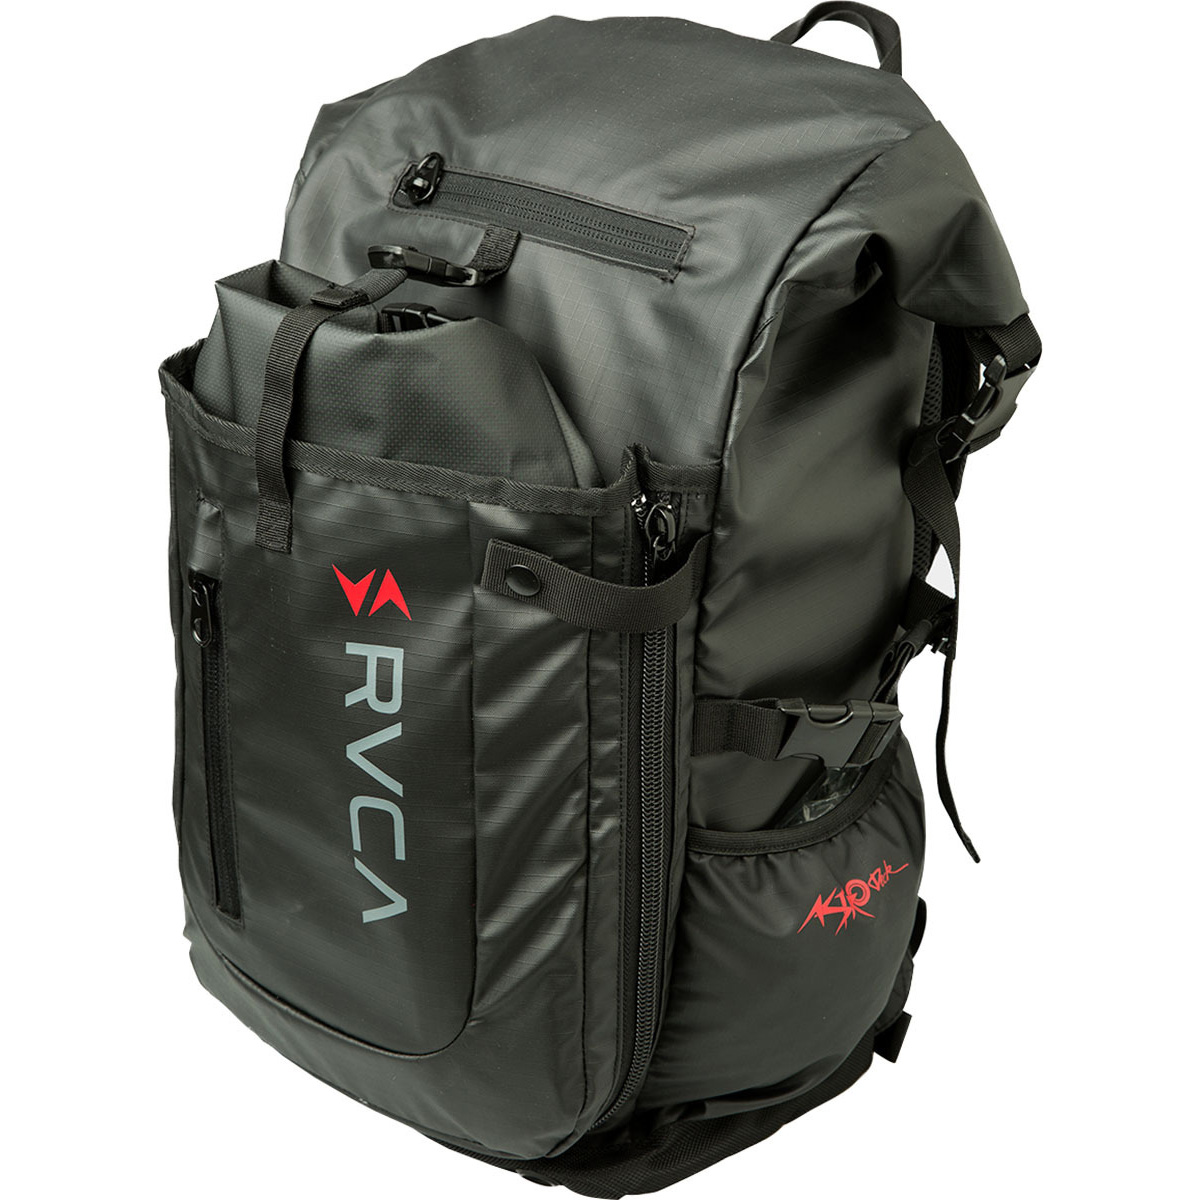 RVCA/ルカ(ルーカ) アクセサリー ASTRODECK SURF PACK バックパック